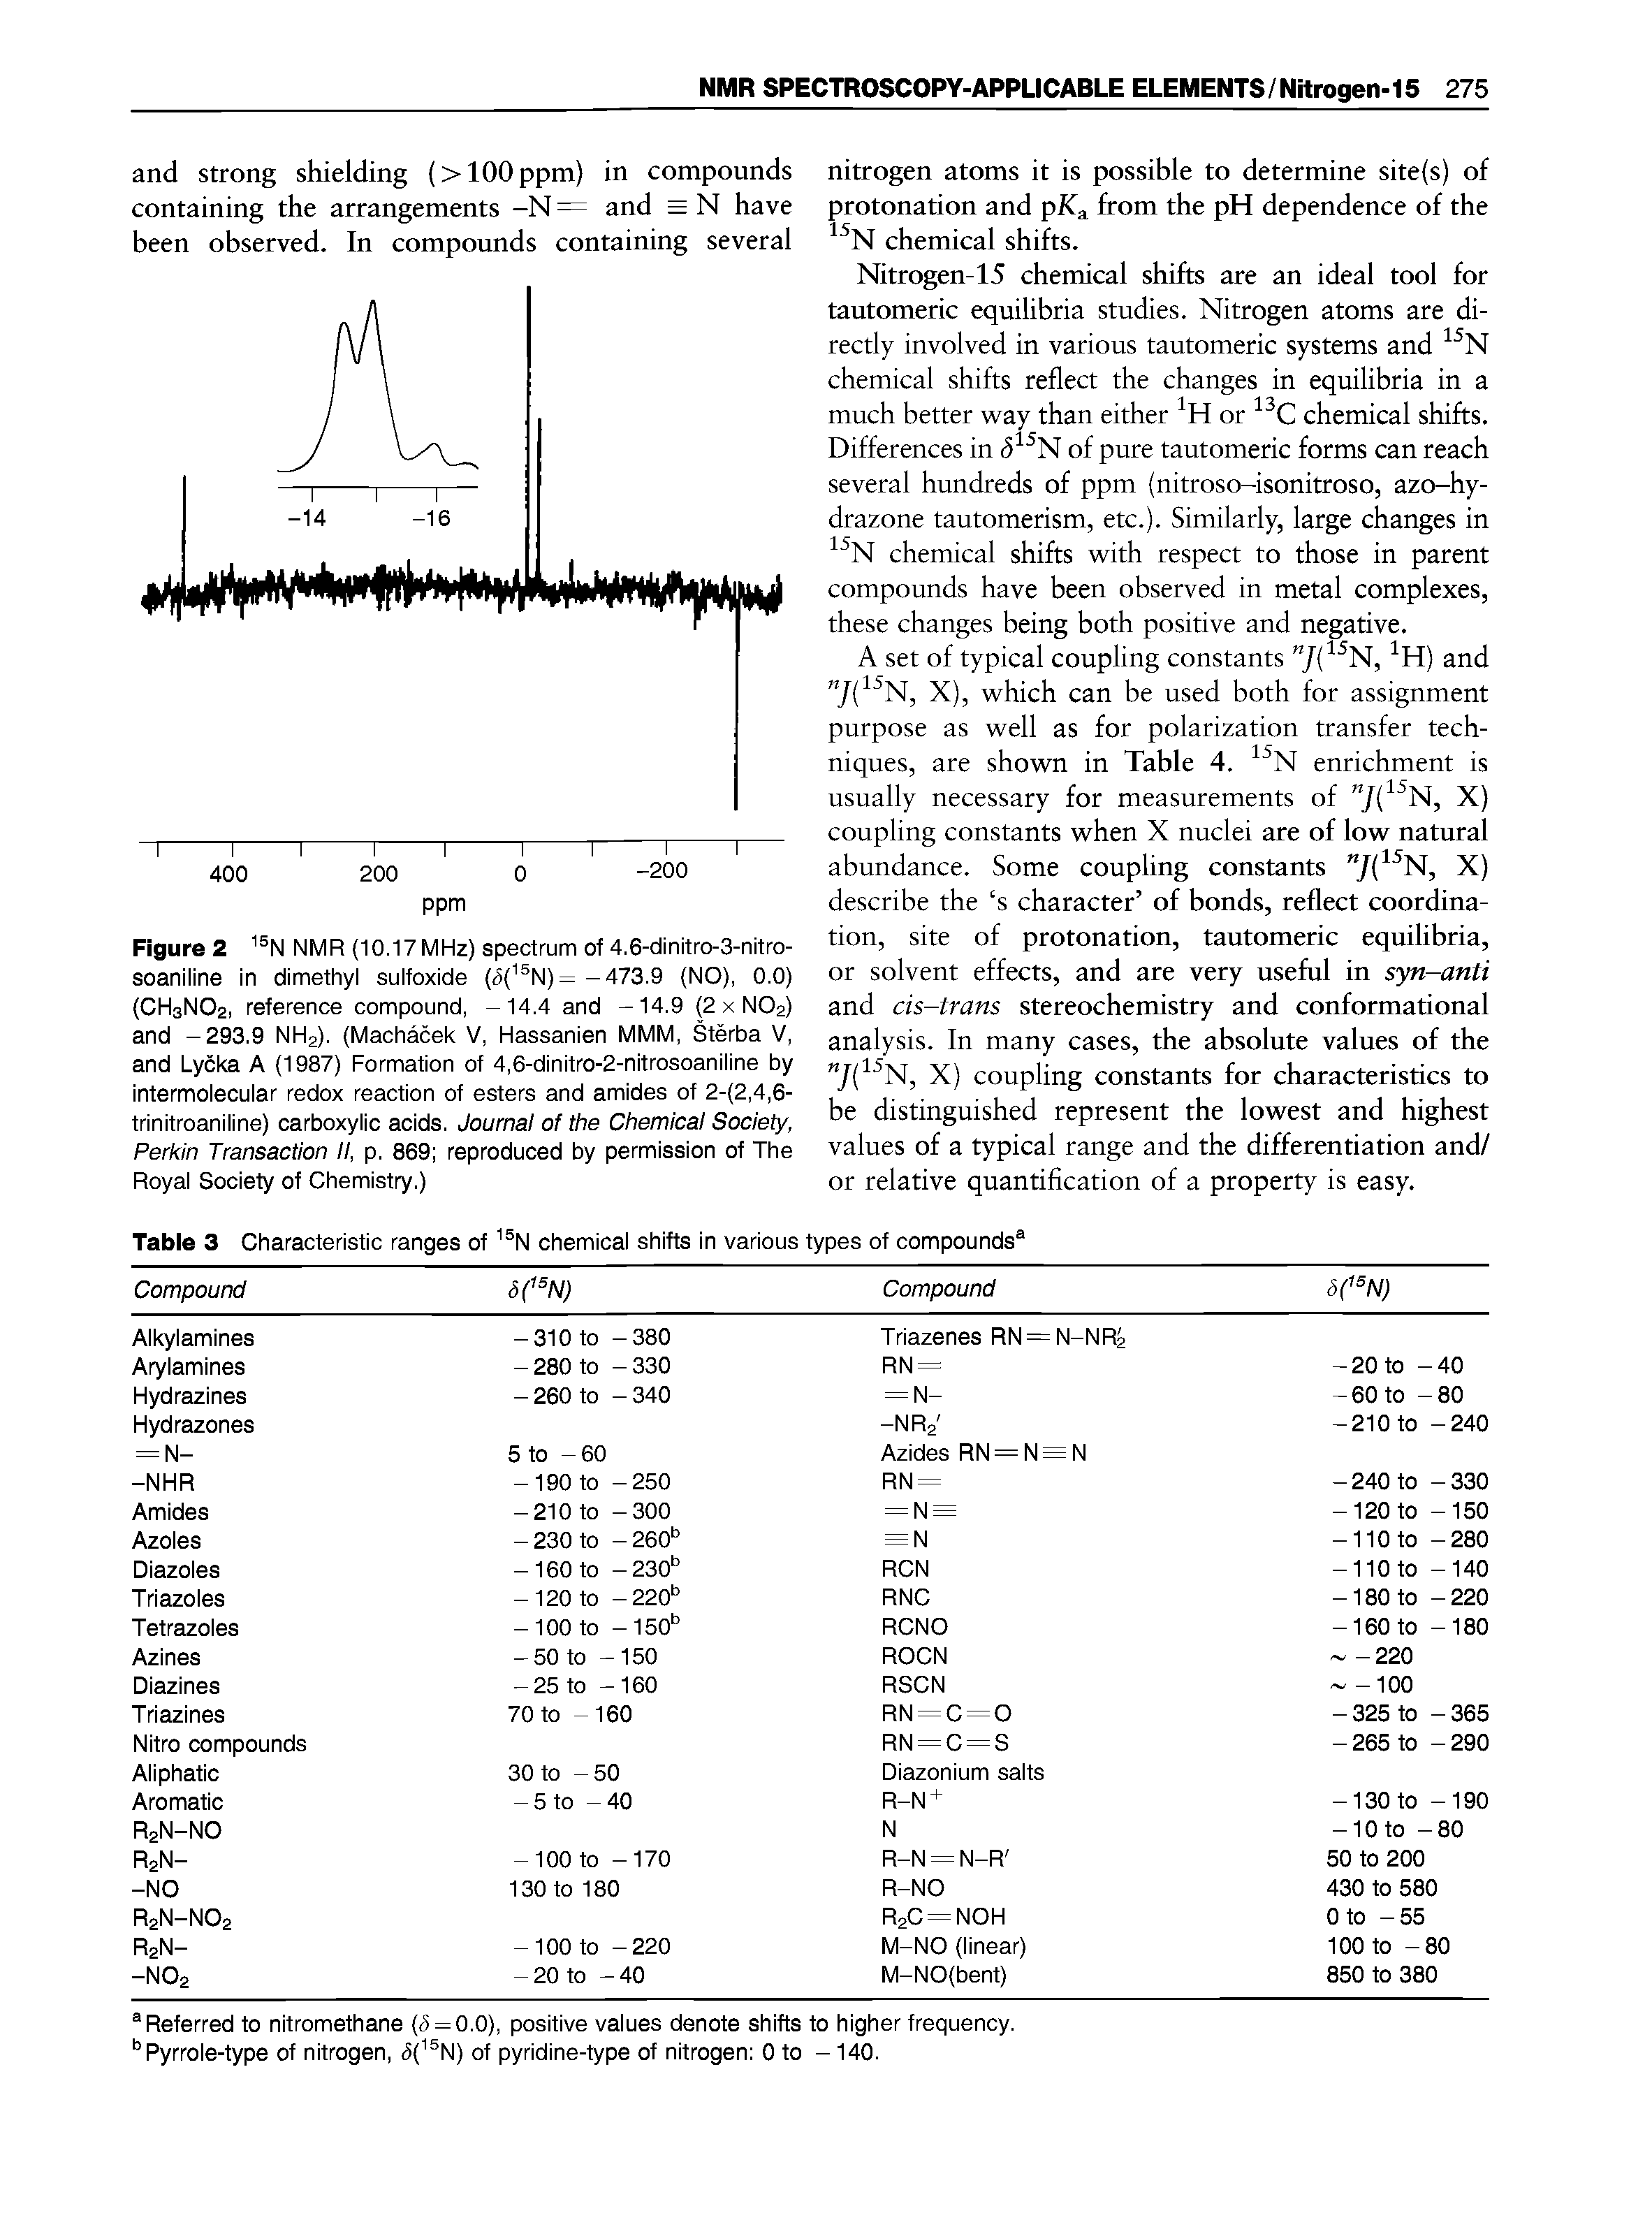 Figure 2 NMR (10.17 MHz) spectrum of 4,6-dinitro-3-nitro-soaniline in dimethyl sulfoxide (<5 N)= -473.9 (NO), 0.0) CH3NO2, reference compound, -14.4 and -14.9 (2 x NO2) and -293.9 NH2). (Machacek V, Hassanien MMM, Sterba V, and Lycka A (1987) Formation of 4,6-dinitro-2-nitrosoaniline by intermolecular redox reaction of esters and amides of 2- 2,4,6-trinitroaniline) carboxylic acids. Journal of the Chemical Society, Perkin Transaction II, p. 869 reproduced by permission of The Royal Society of Chemistry.)...